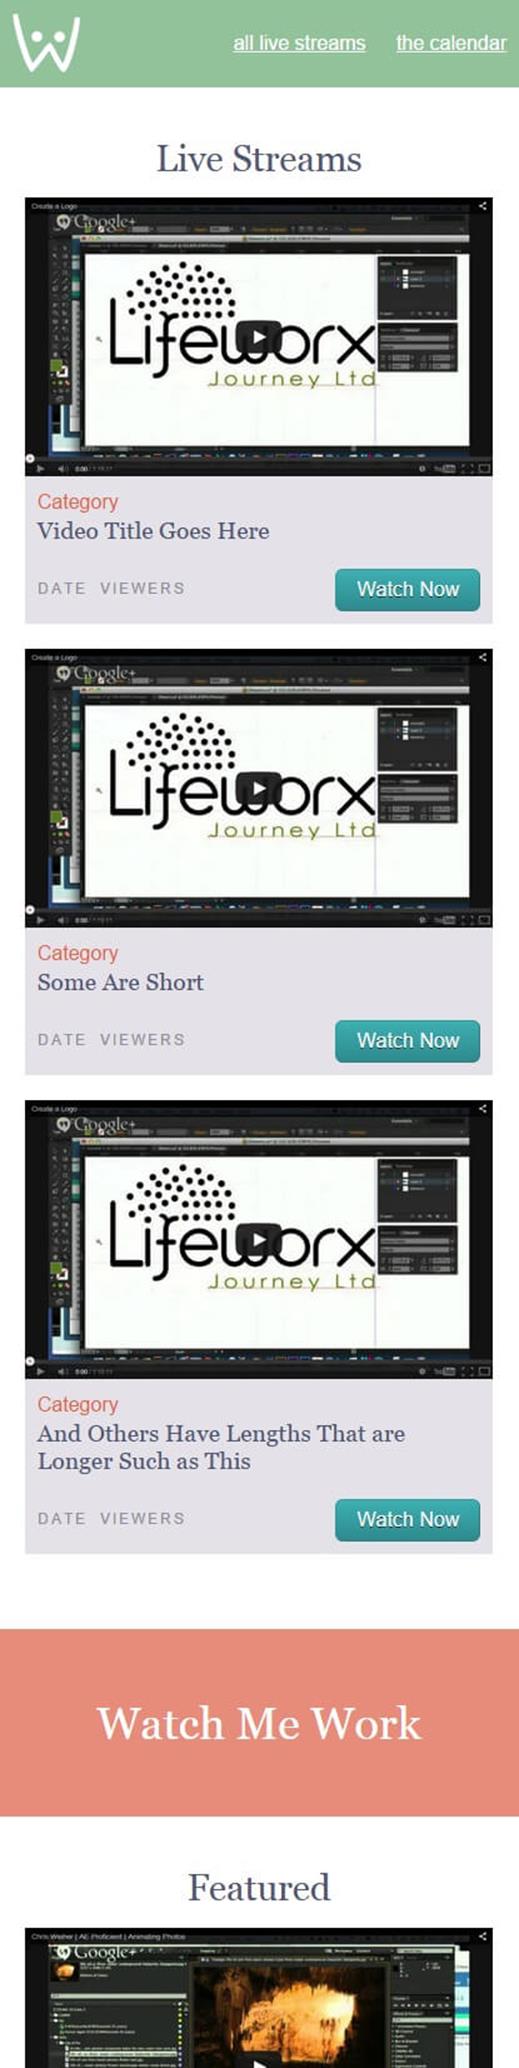 My narrow-screen wireframe reorders the page sections to place Live Streams at the top